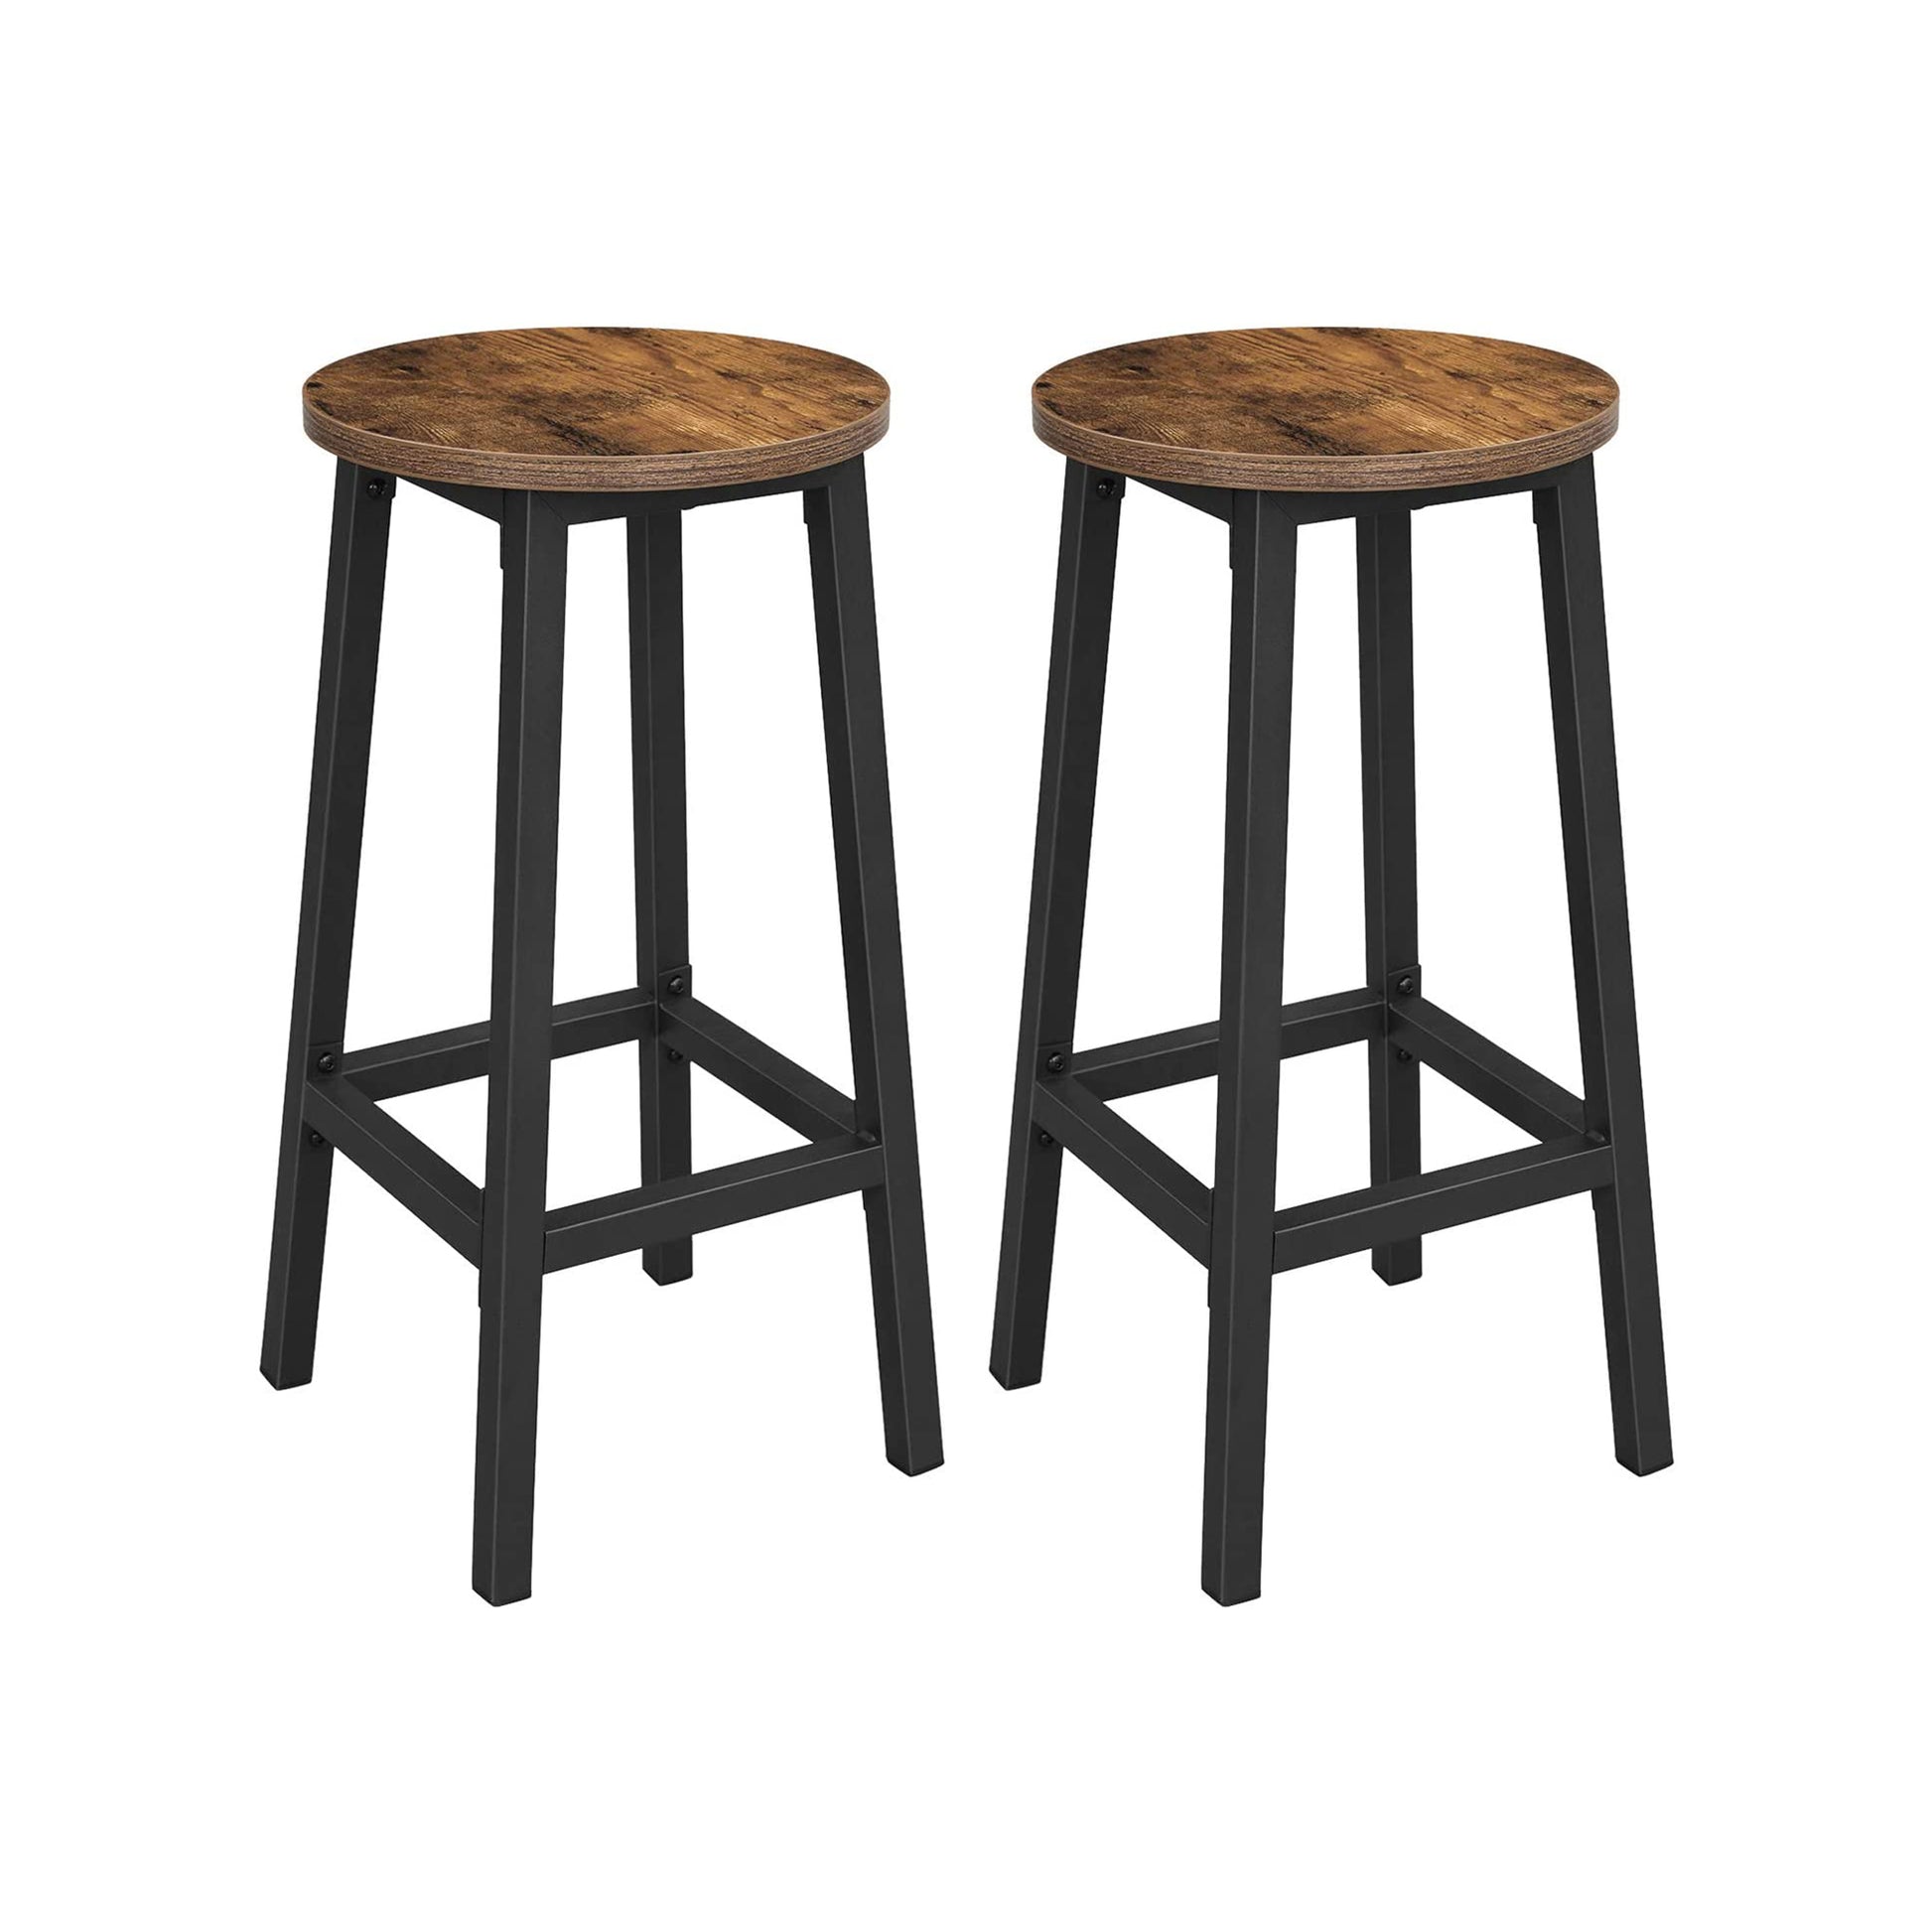 Set of 2 Bar Stools, Tall Kitchen Stools, Sturdy Steel Frame, 65 cm Tall, Easy Assembly, Rustic Brown and Black, VASAGLE, 4